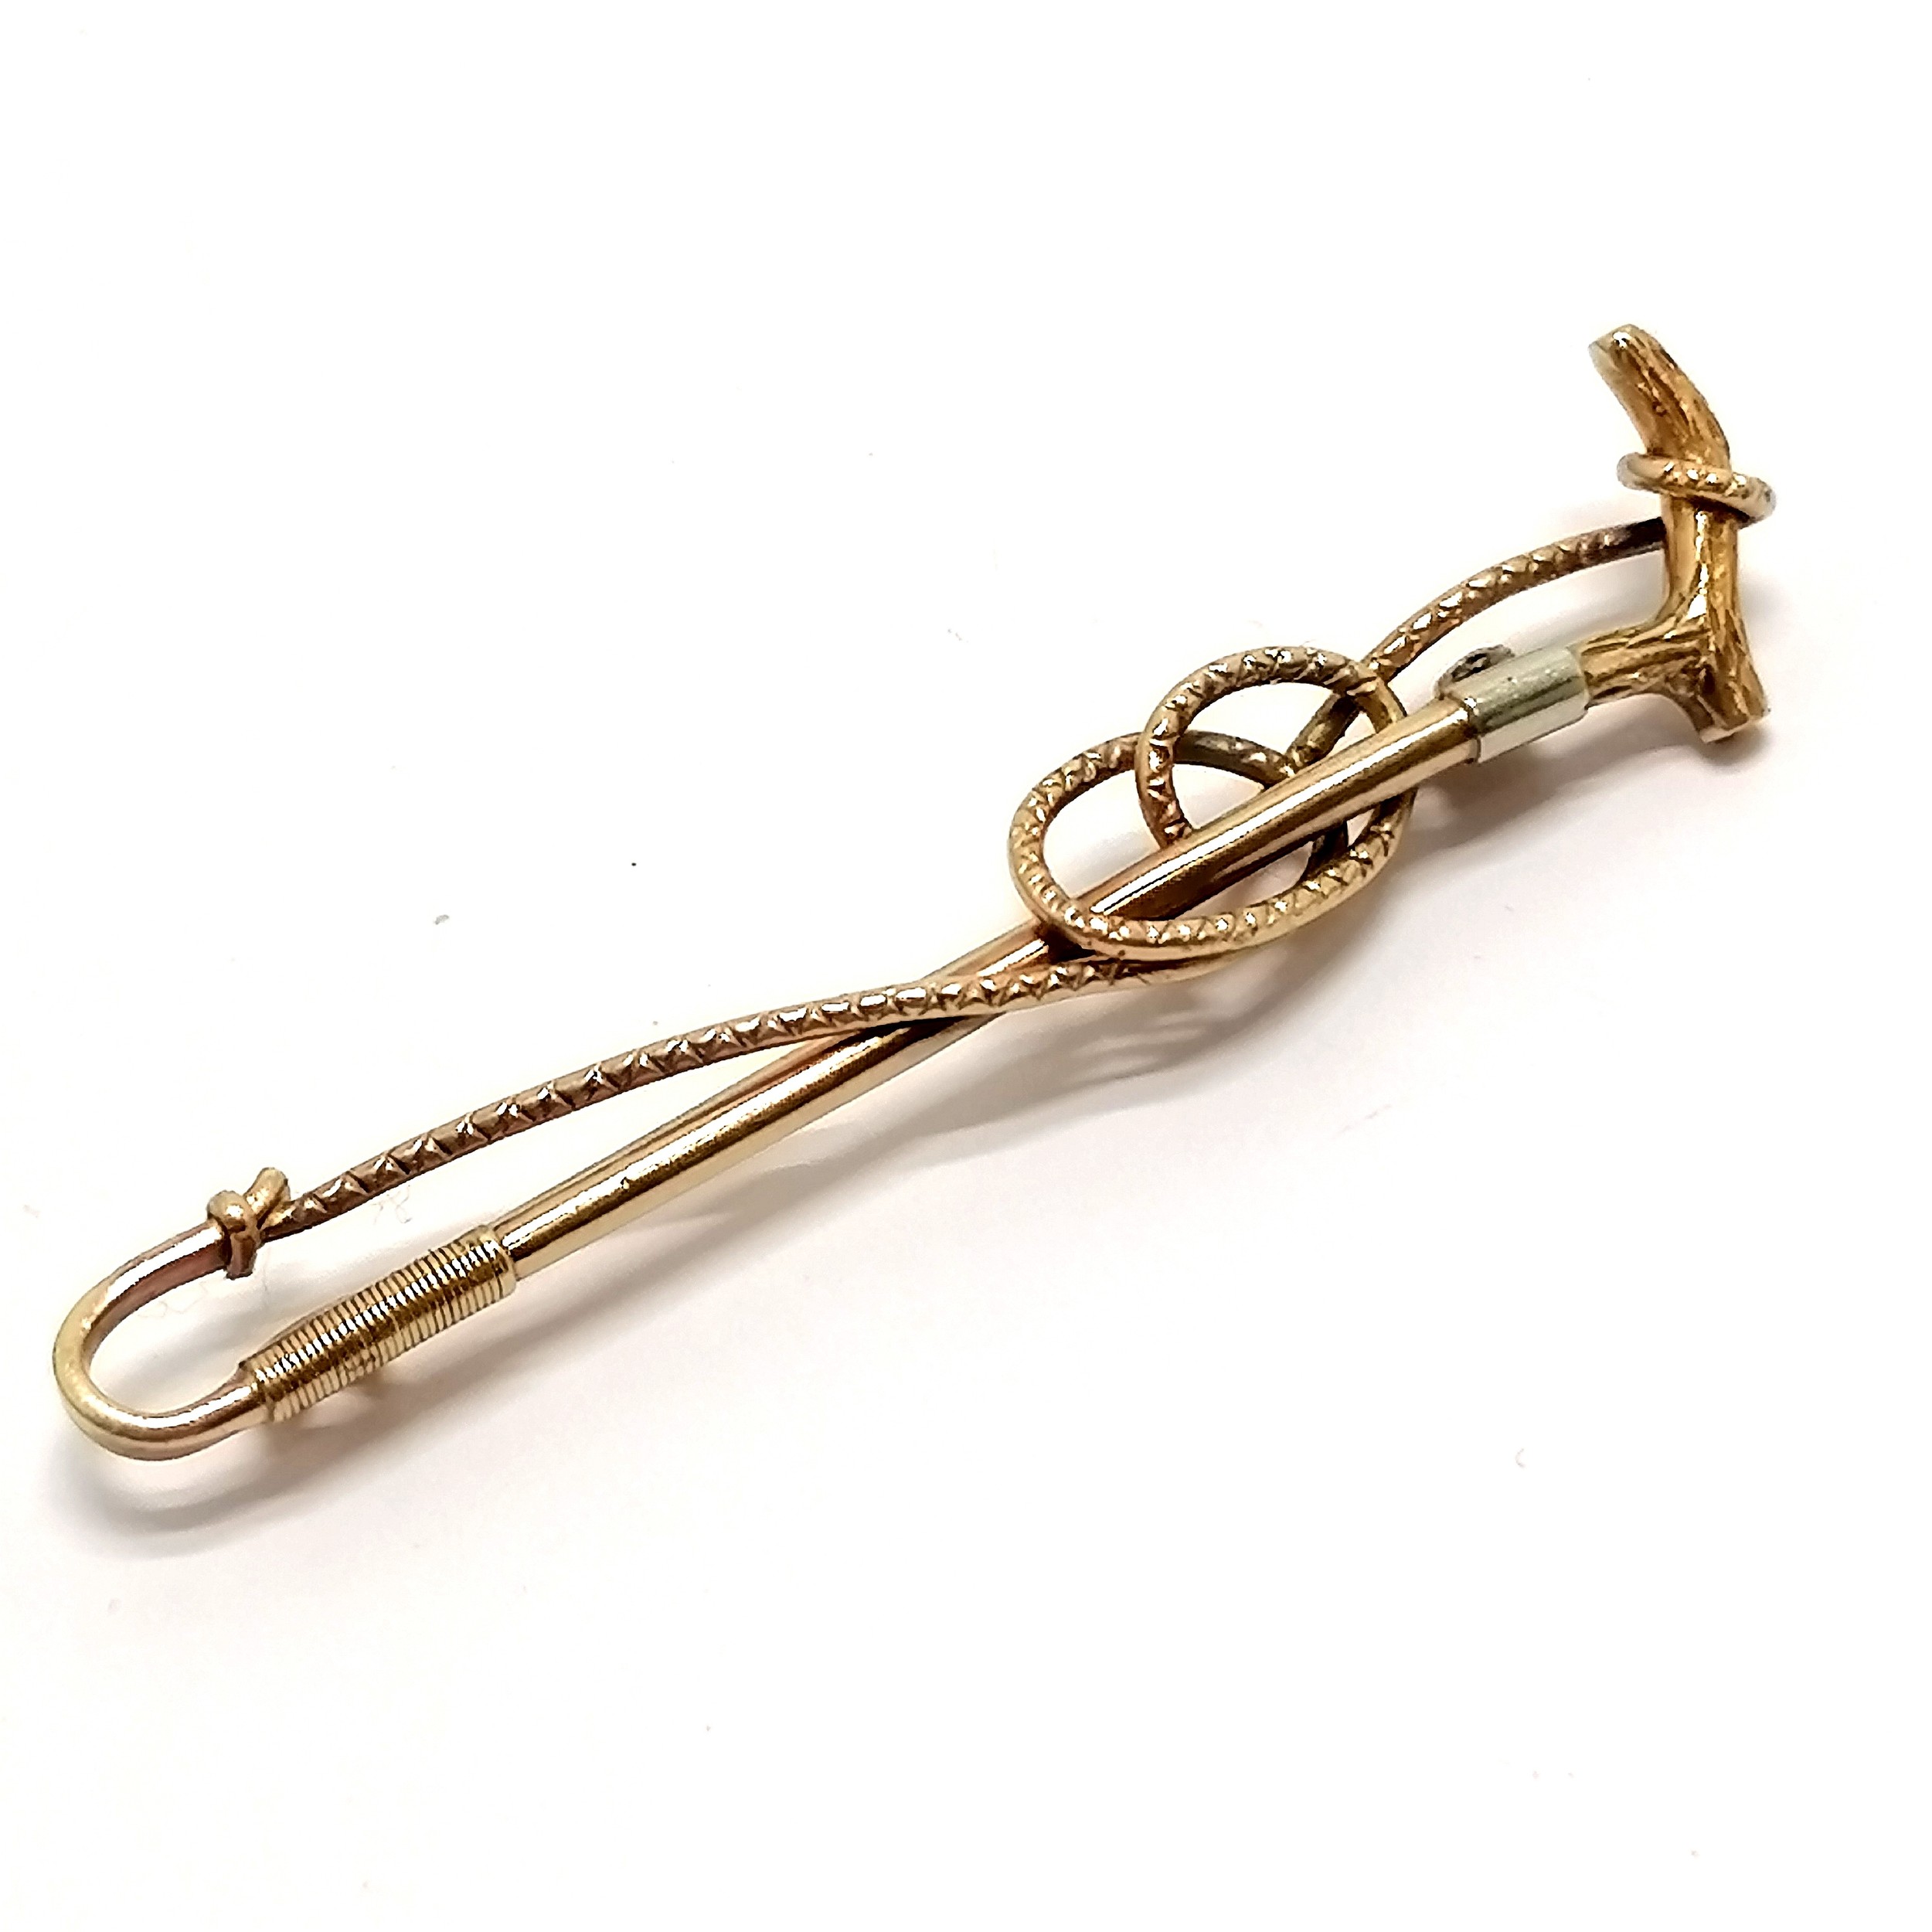 9ct hallmarked gold bar brooch in the form of a riding crop / whip with white metal detail - 6cm & - Image 2 of 2